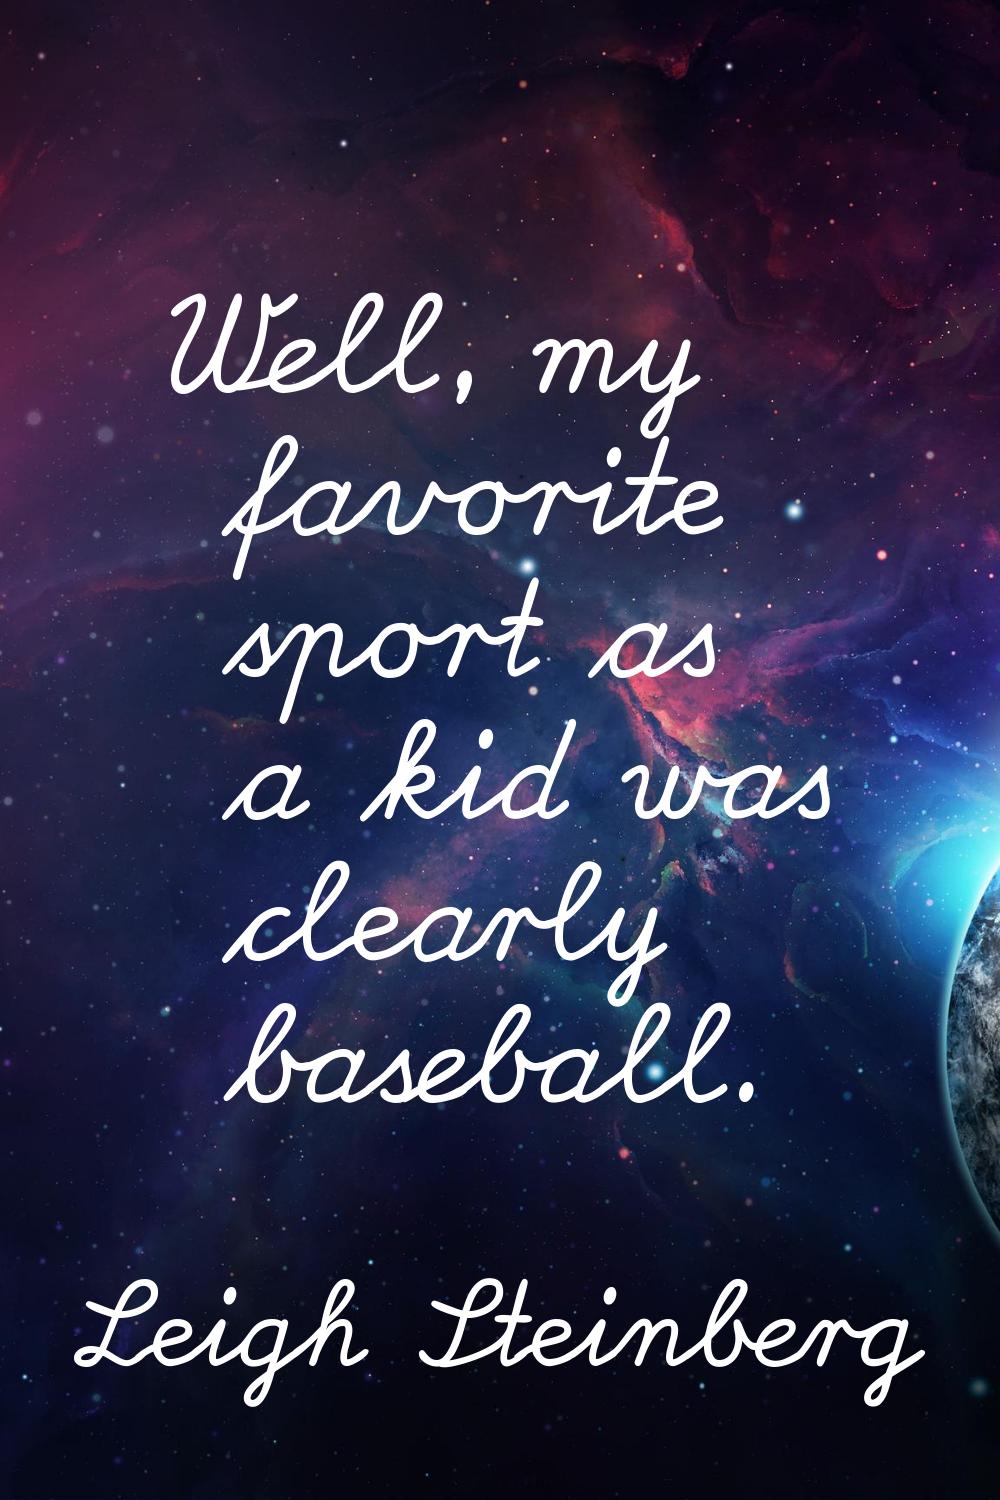 Well, my favorite sport as a kid was clearly baseball.